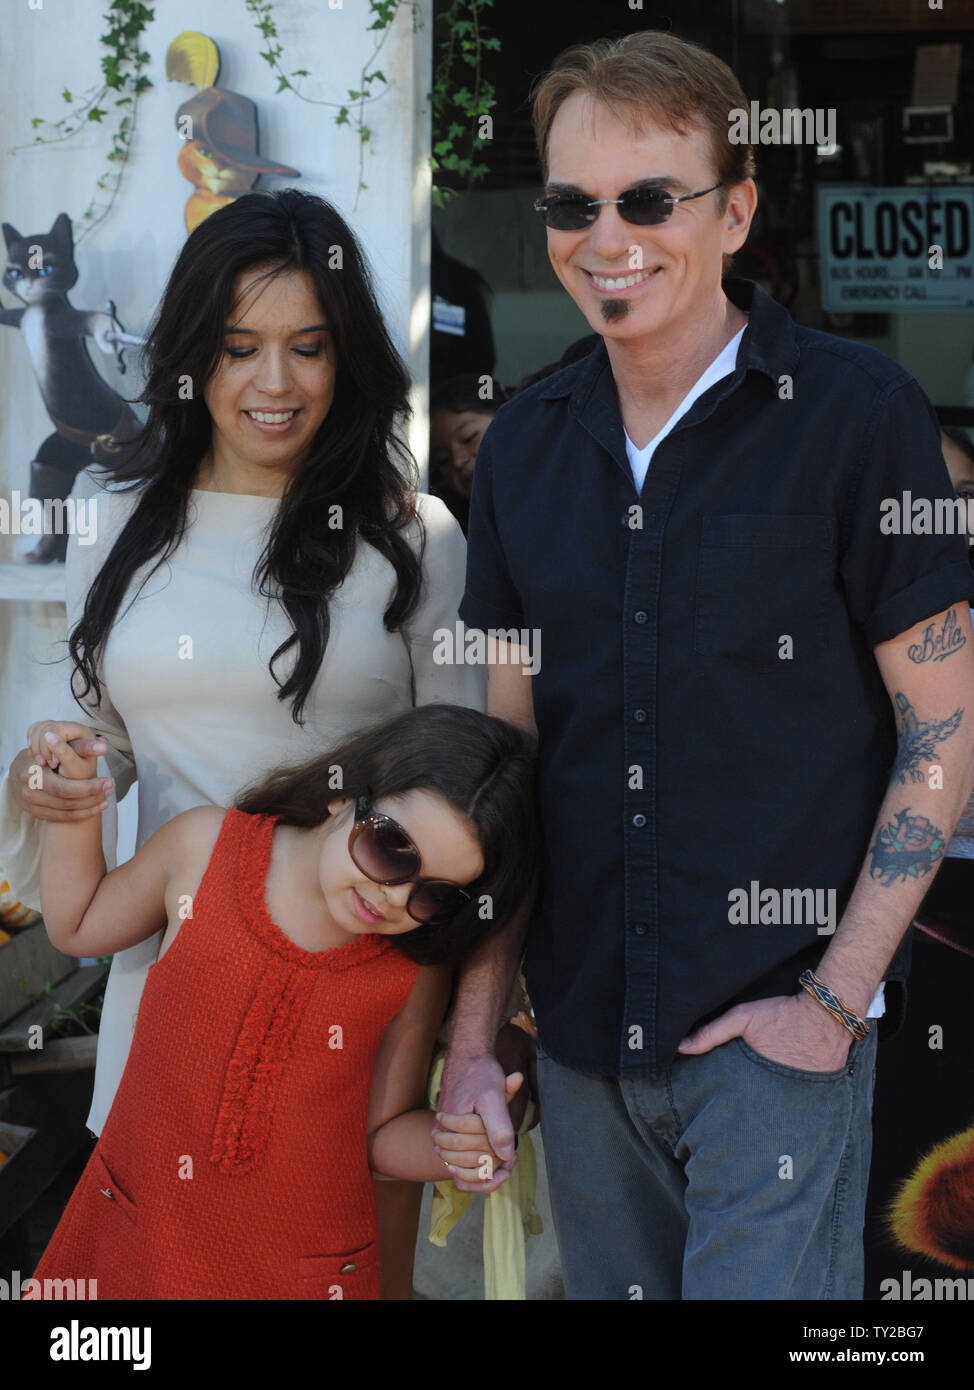 Actor Billy Bob Thorton, the voice of Jack in the motion picture animated comedy 'Puss In Boots', arrives with his wife Connie Angland and their daughter Bella for the premiere of the film at the Regency Village Theatre, in the Westwood section of Los Angeles on October 23, 2011.   UPI/Jim Ruymen Stock Photo